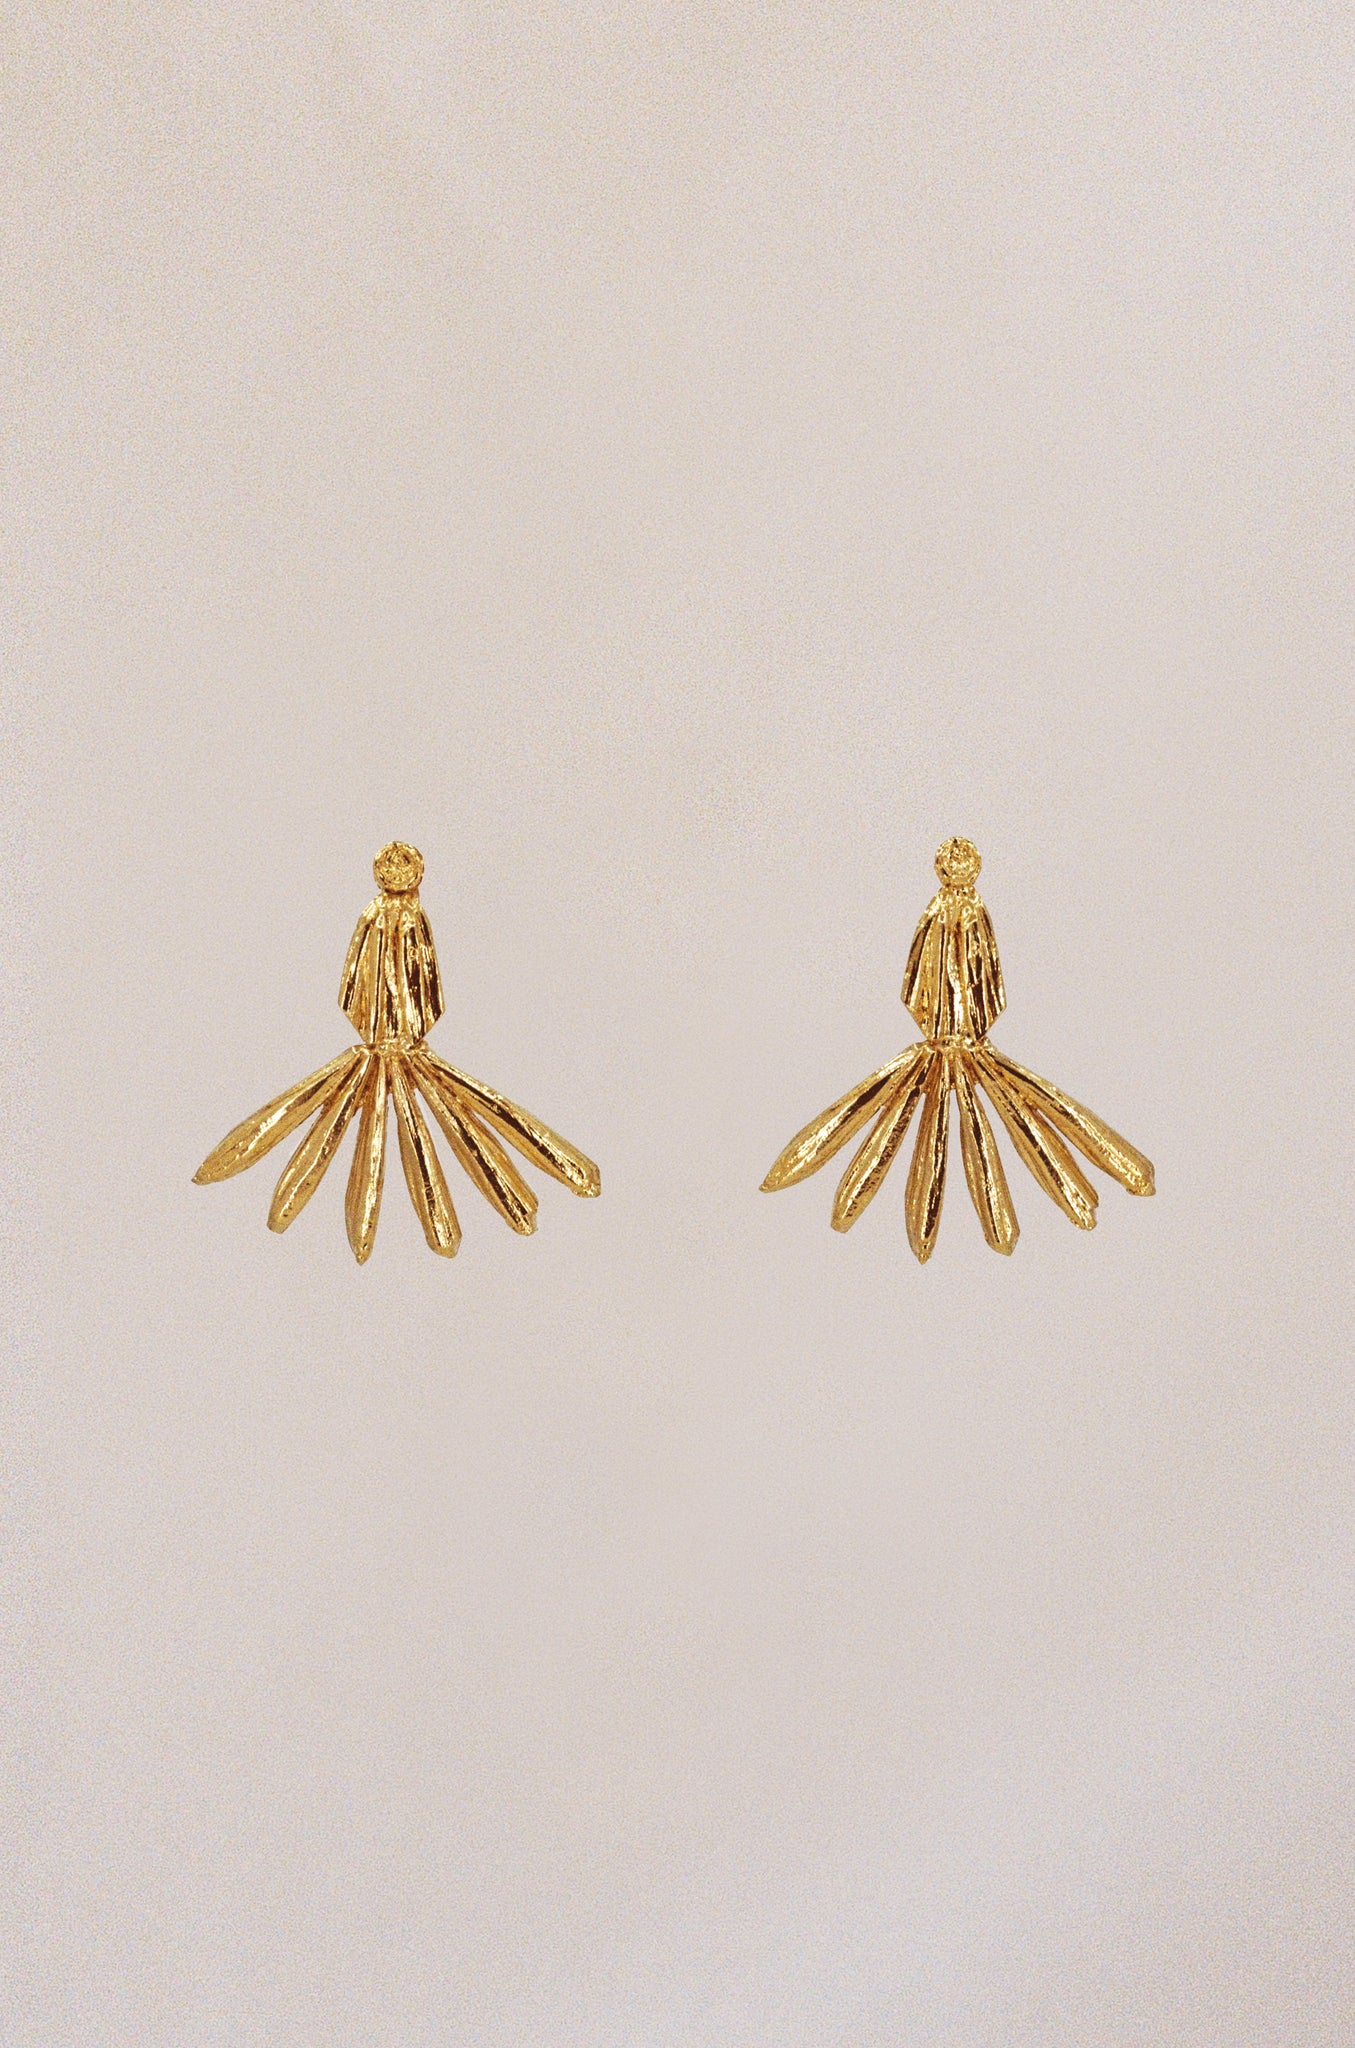 The Usual Place Earrings - Vermeil